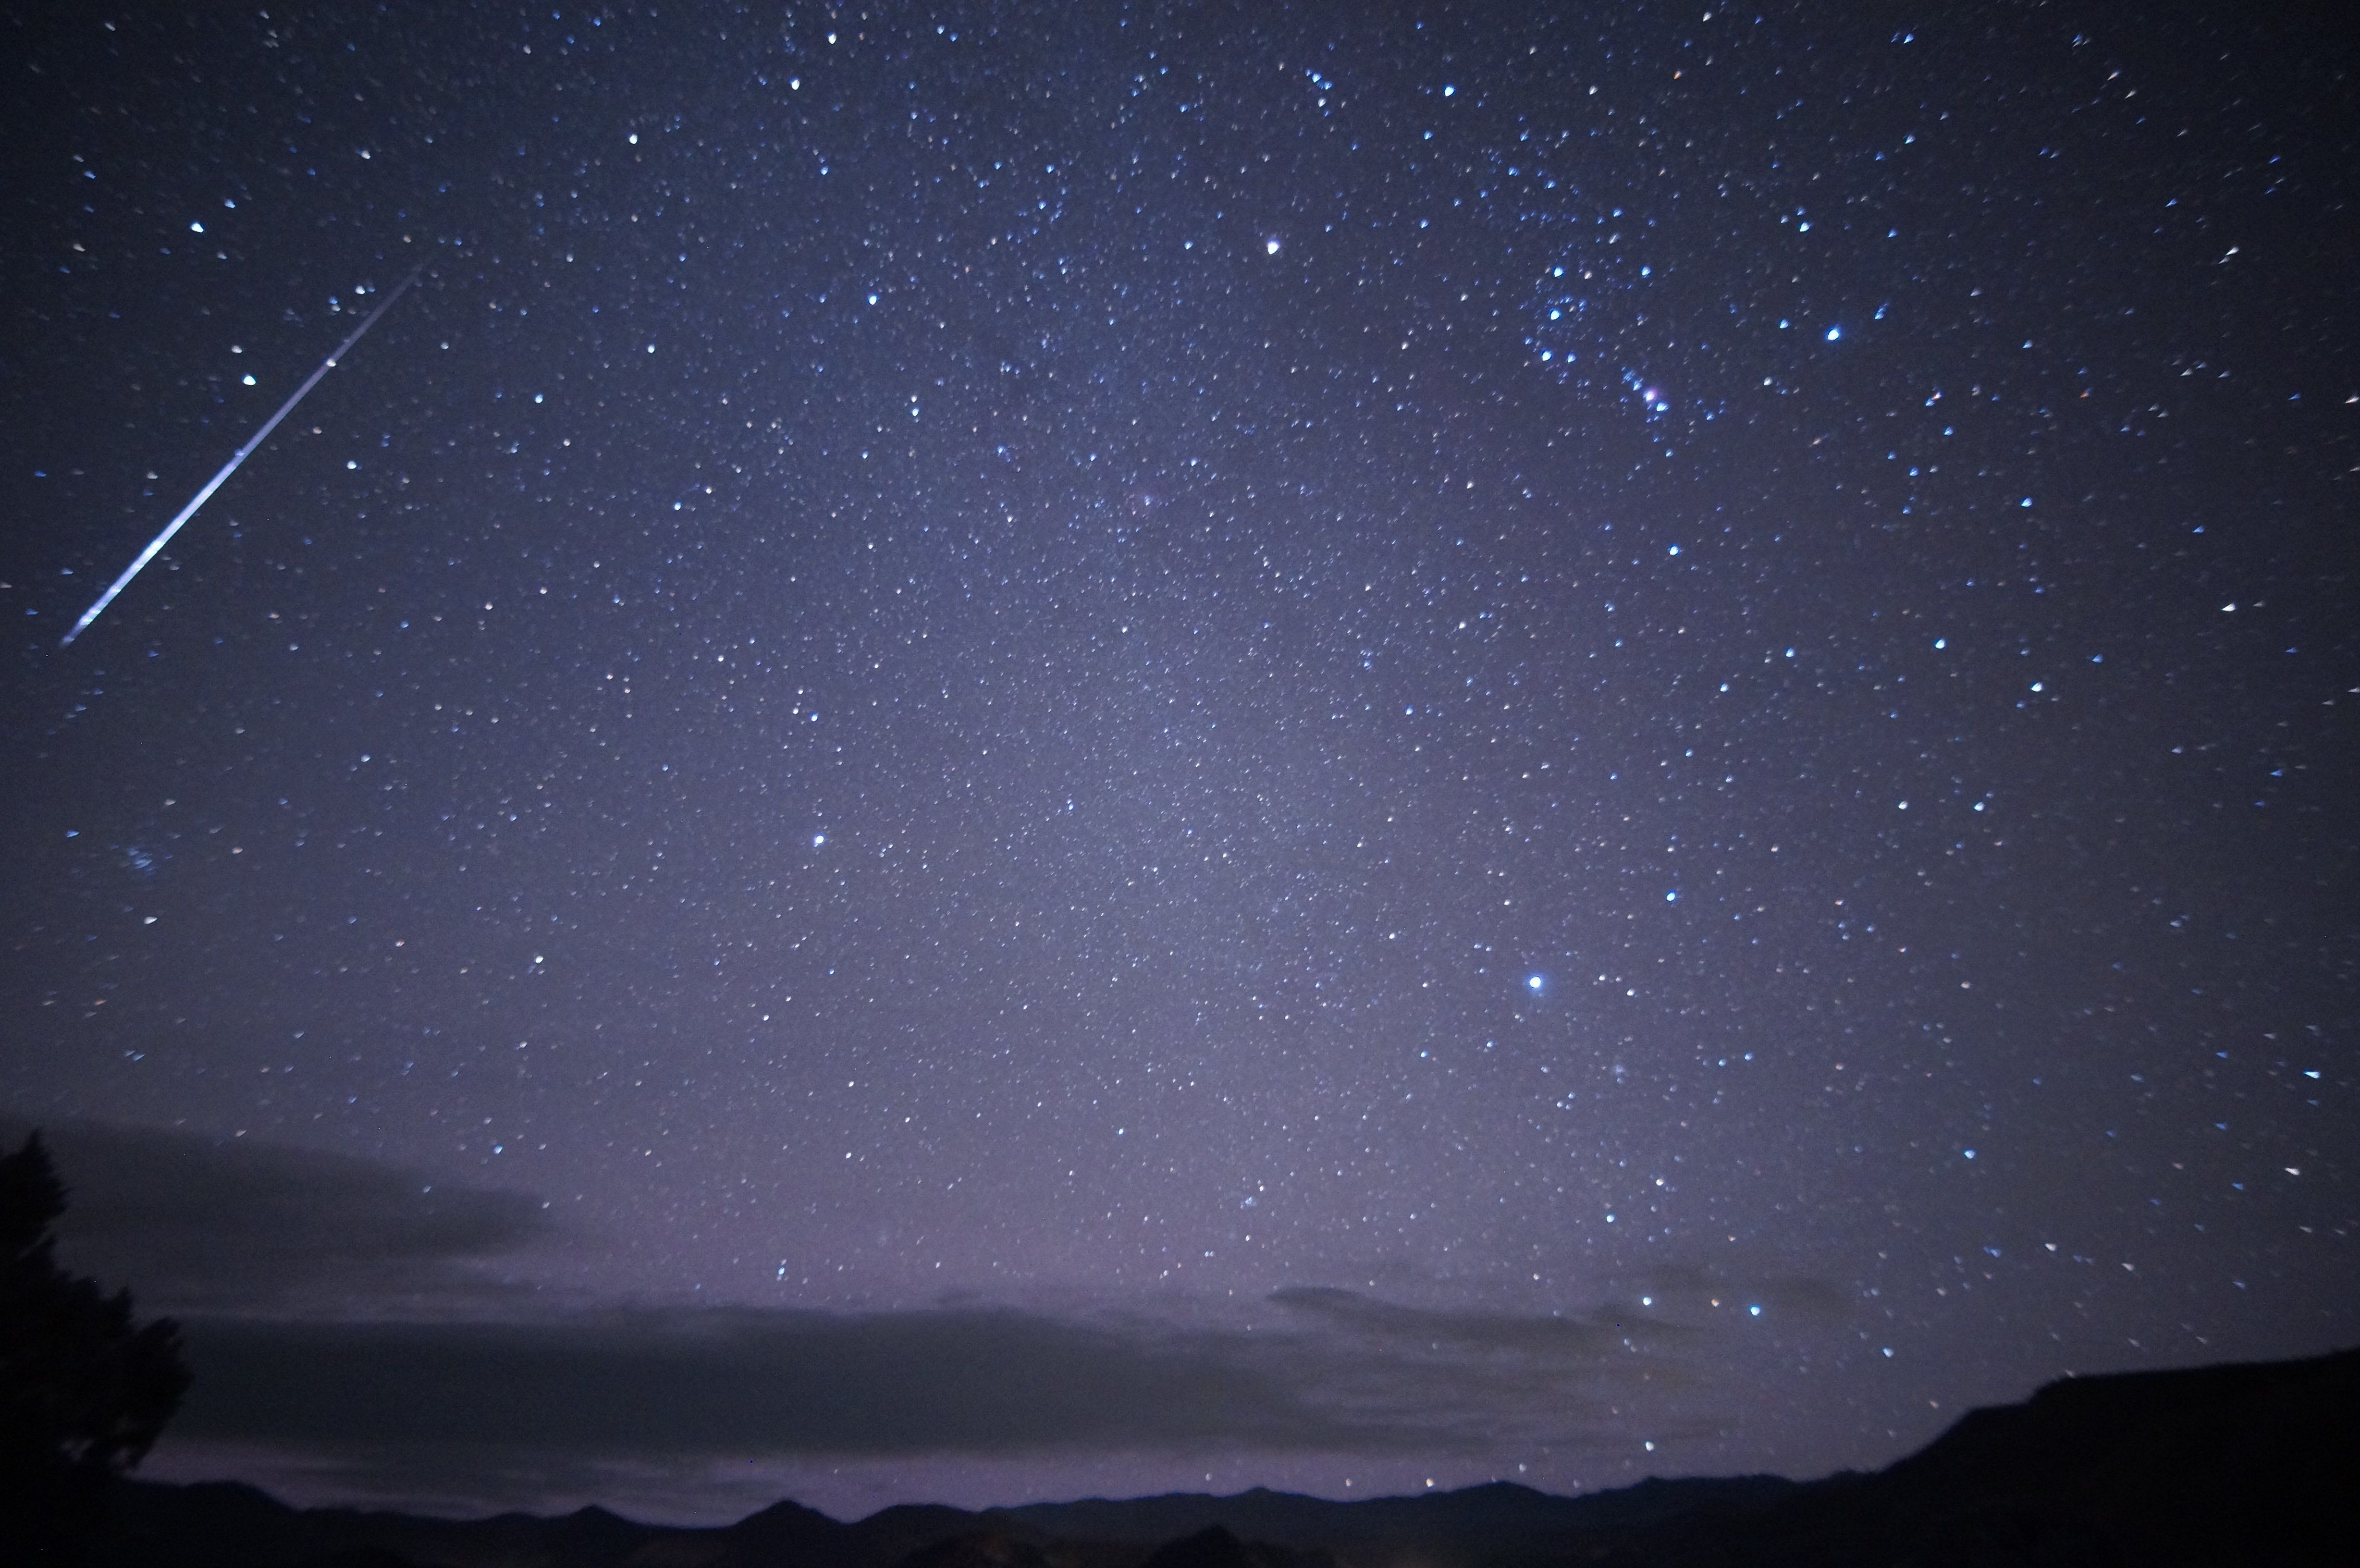 How to watch tonight's stunning meteor shower created by Halley's